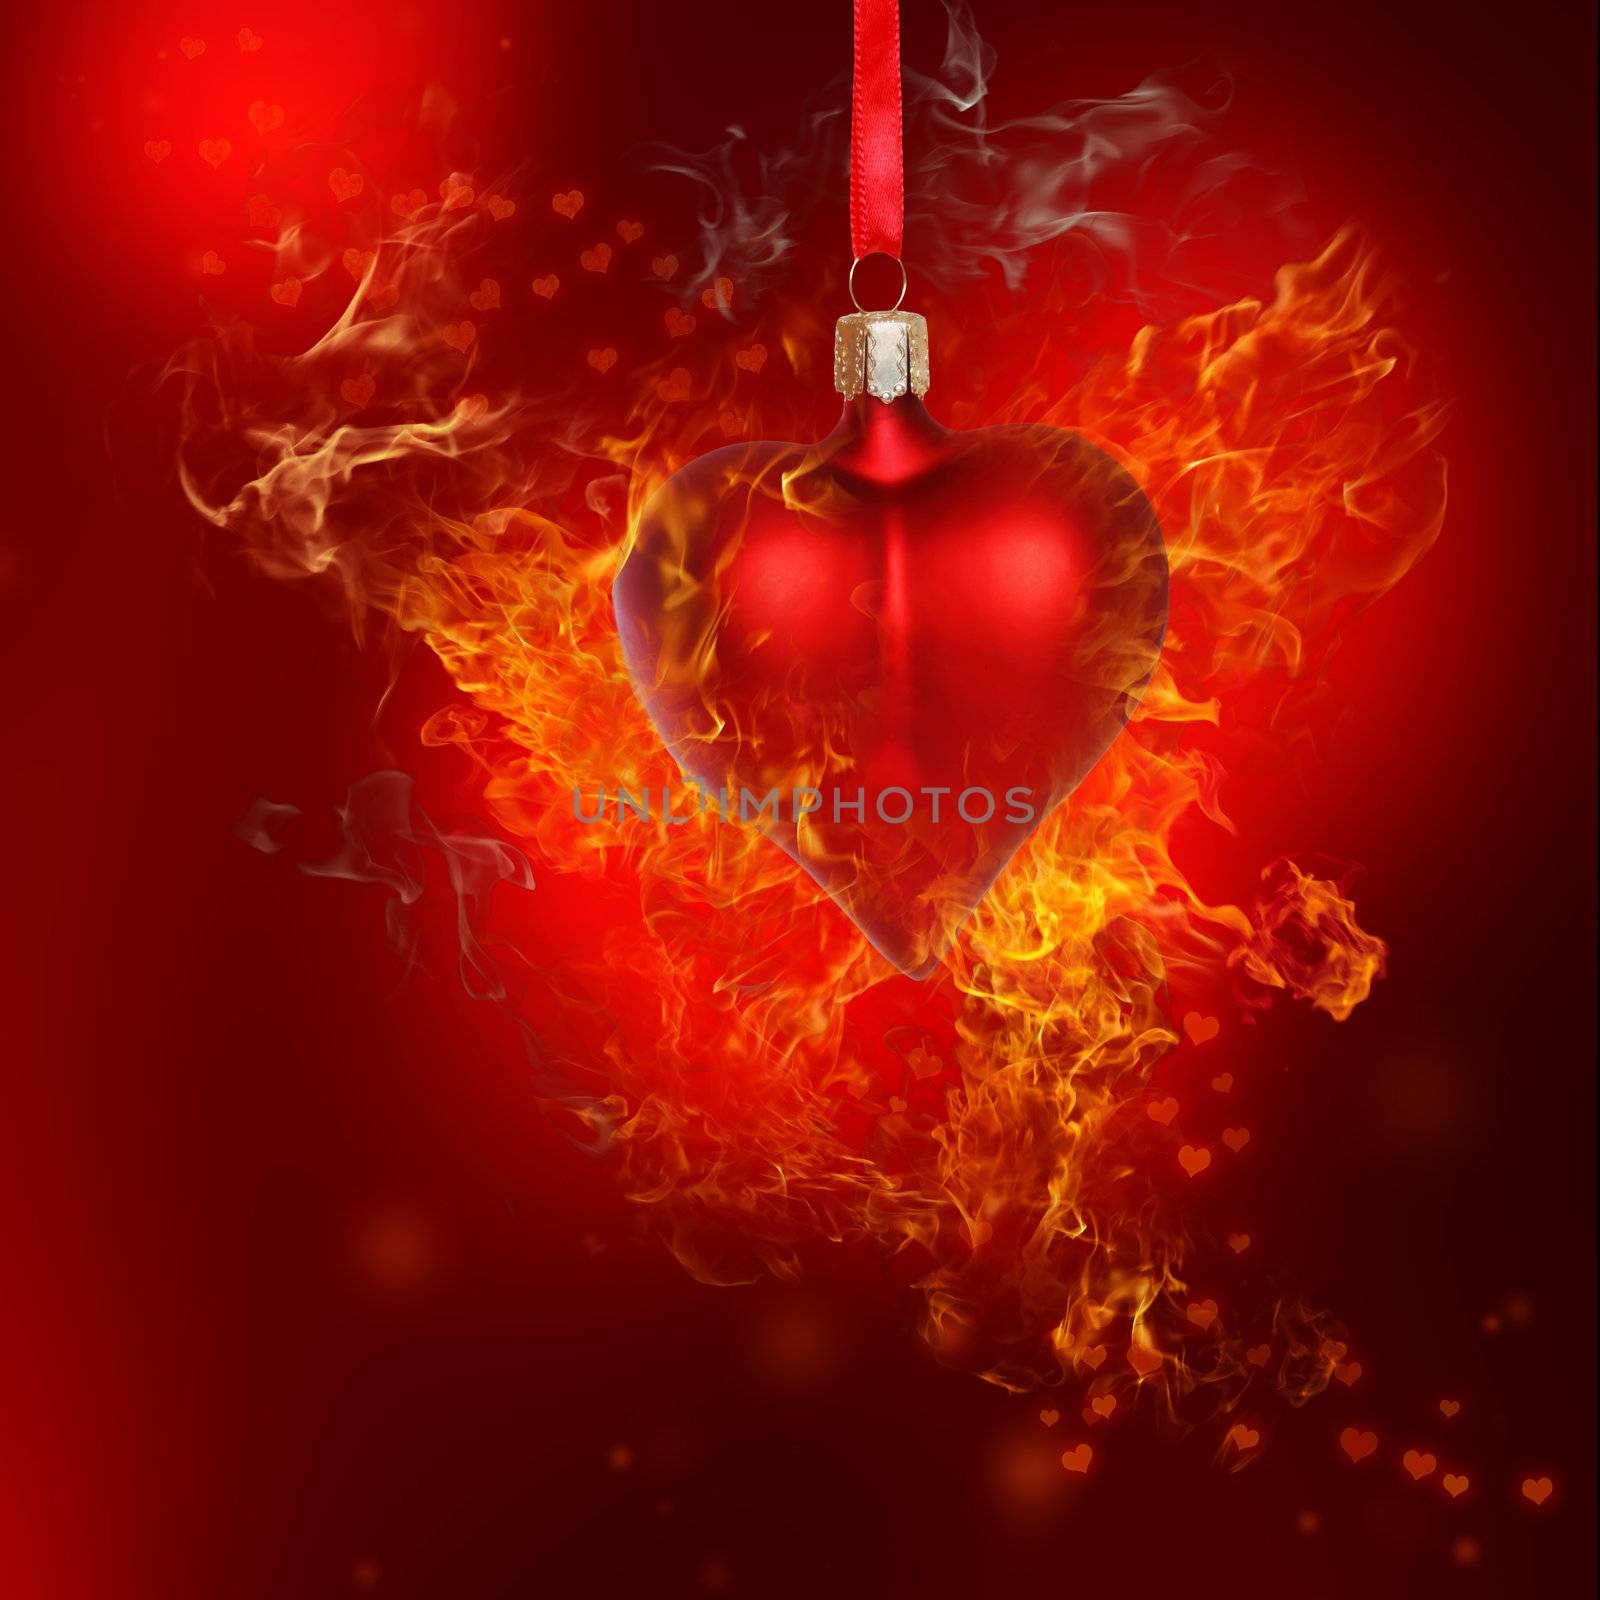 Fire Heart Bauble on Red Background